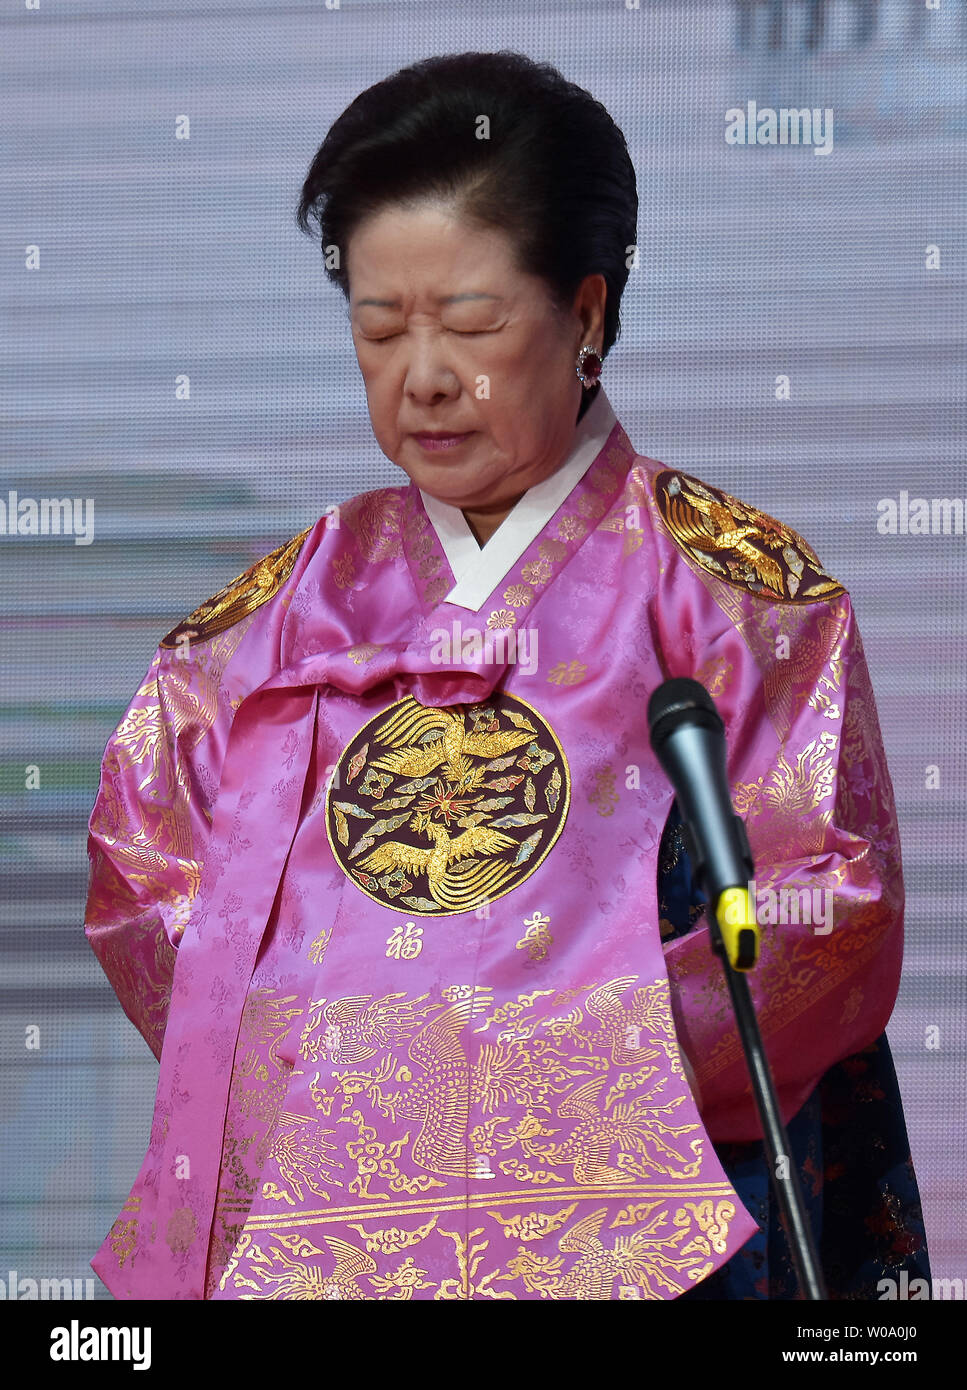 Hak-Ja Han, wife of late Unification Church founder Sun Myung Moon prays a Blessing Ceremony of the Family Federation for World Peace and Unification at the CheongShim Peace World Center in Gapyeong, South Korea, on February 20, 2016.     Photo by keizo Mori Stock Photo